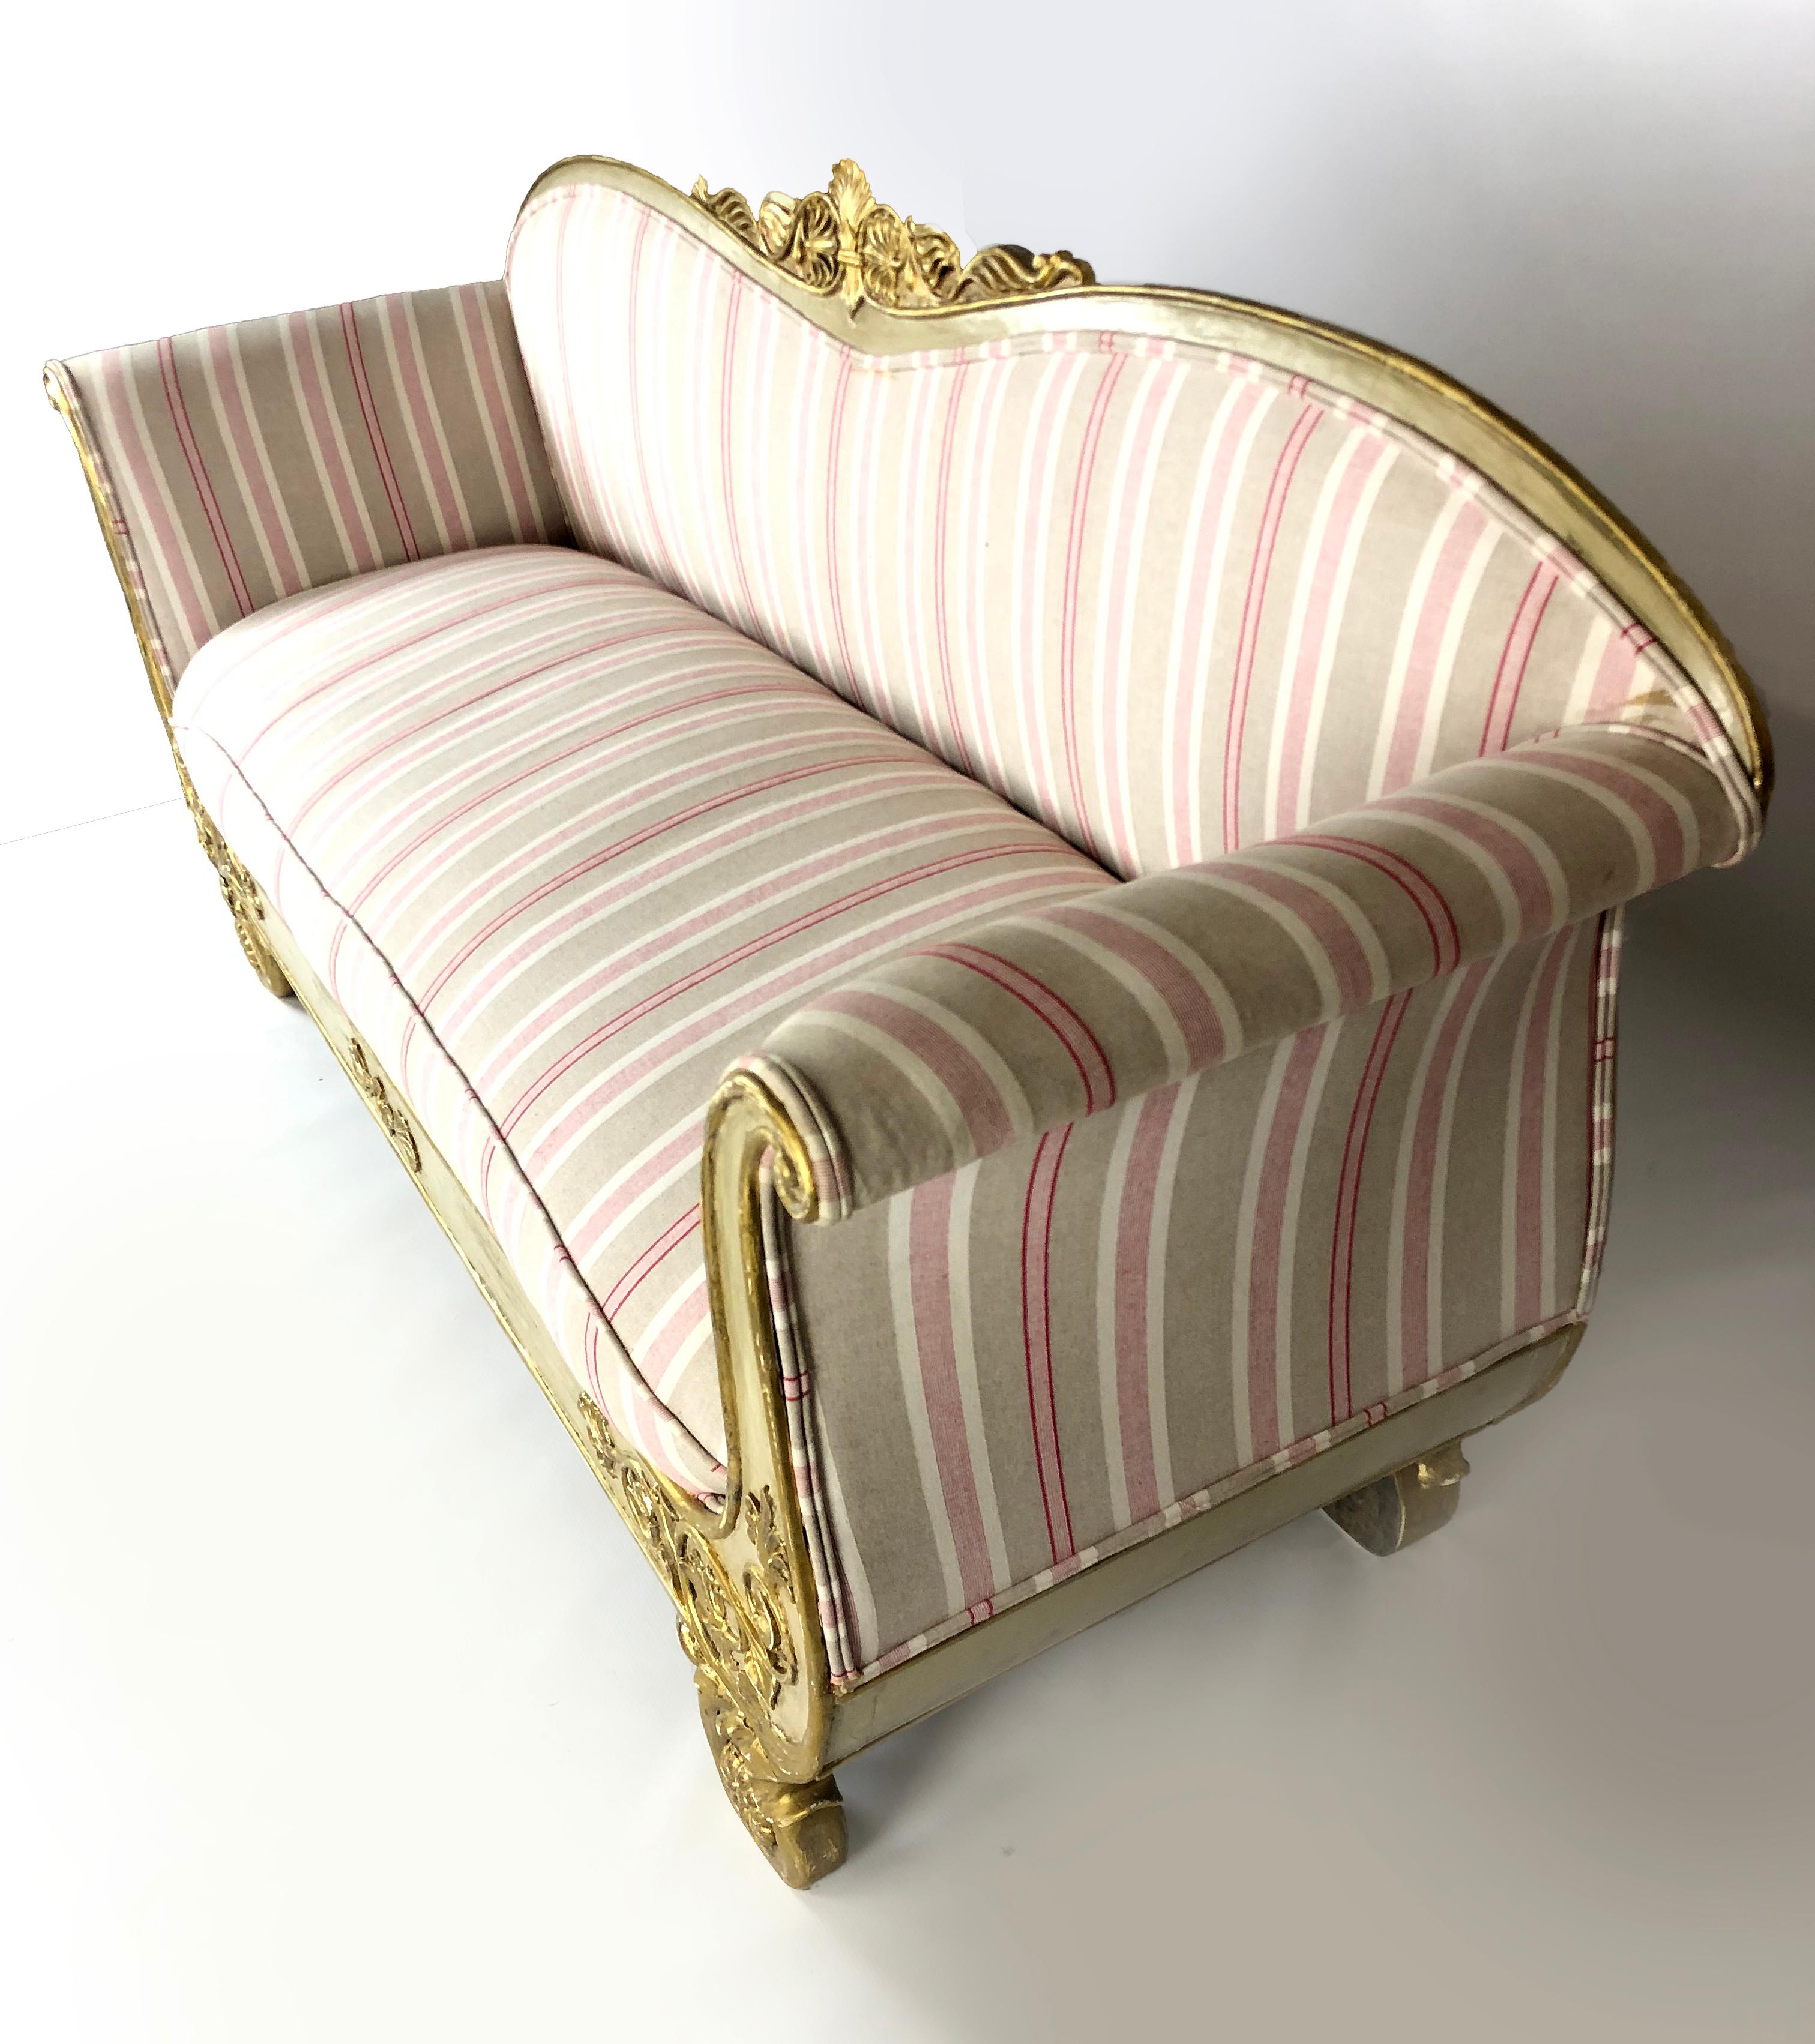 Outstanding Swedish Gustavian circa 1800 settee / sofa with graceful arches on back and sides, supported by carved medallion shaped legs. The fine frame carvings are in relief, slightly time worn and with great patina. The tiaras in the center of